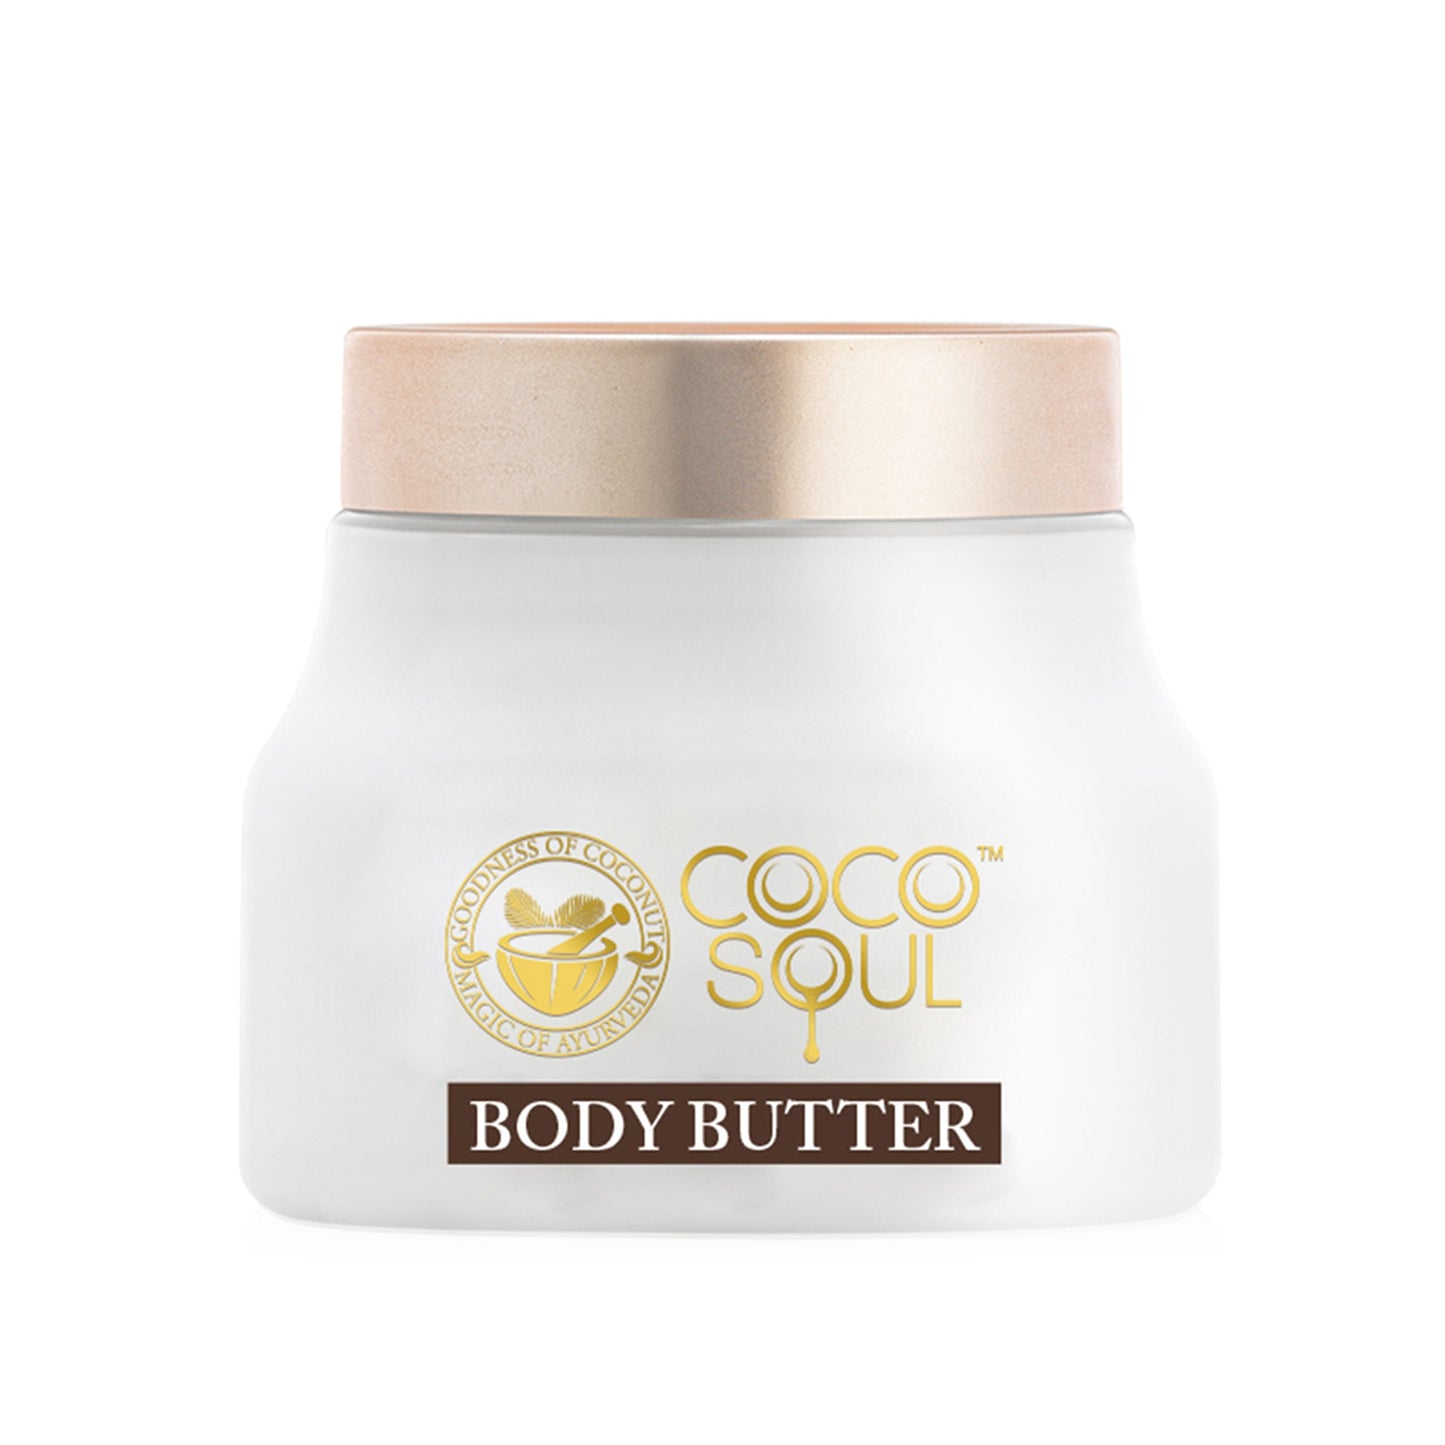 Body Butter  From the makers of Parachute Advansed  140g